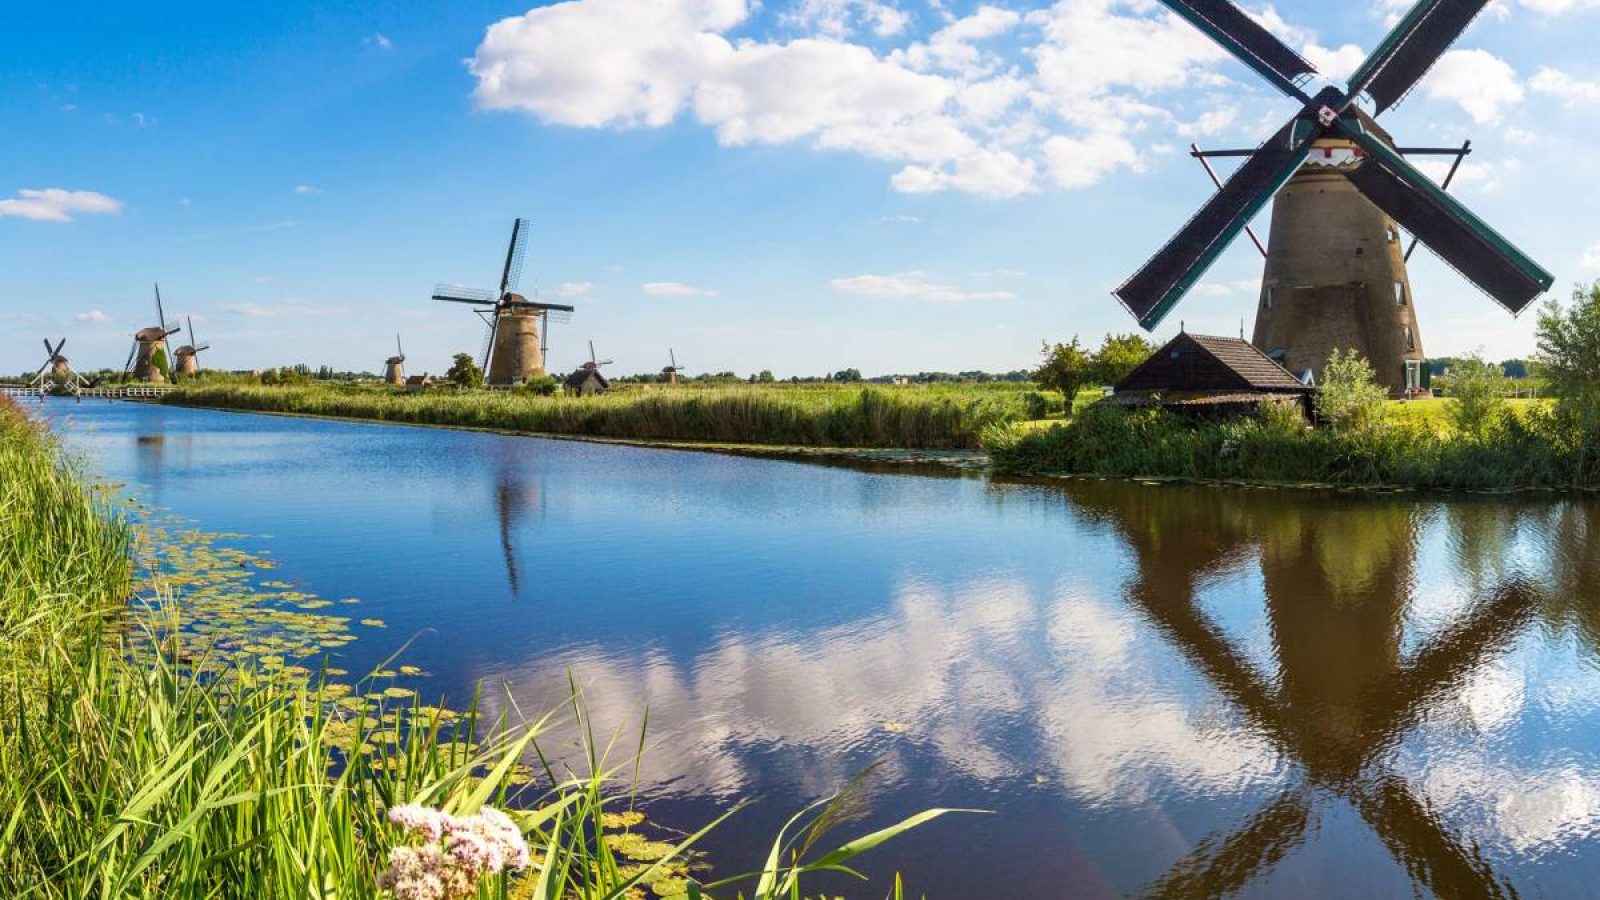 The netherlands